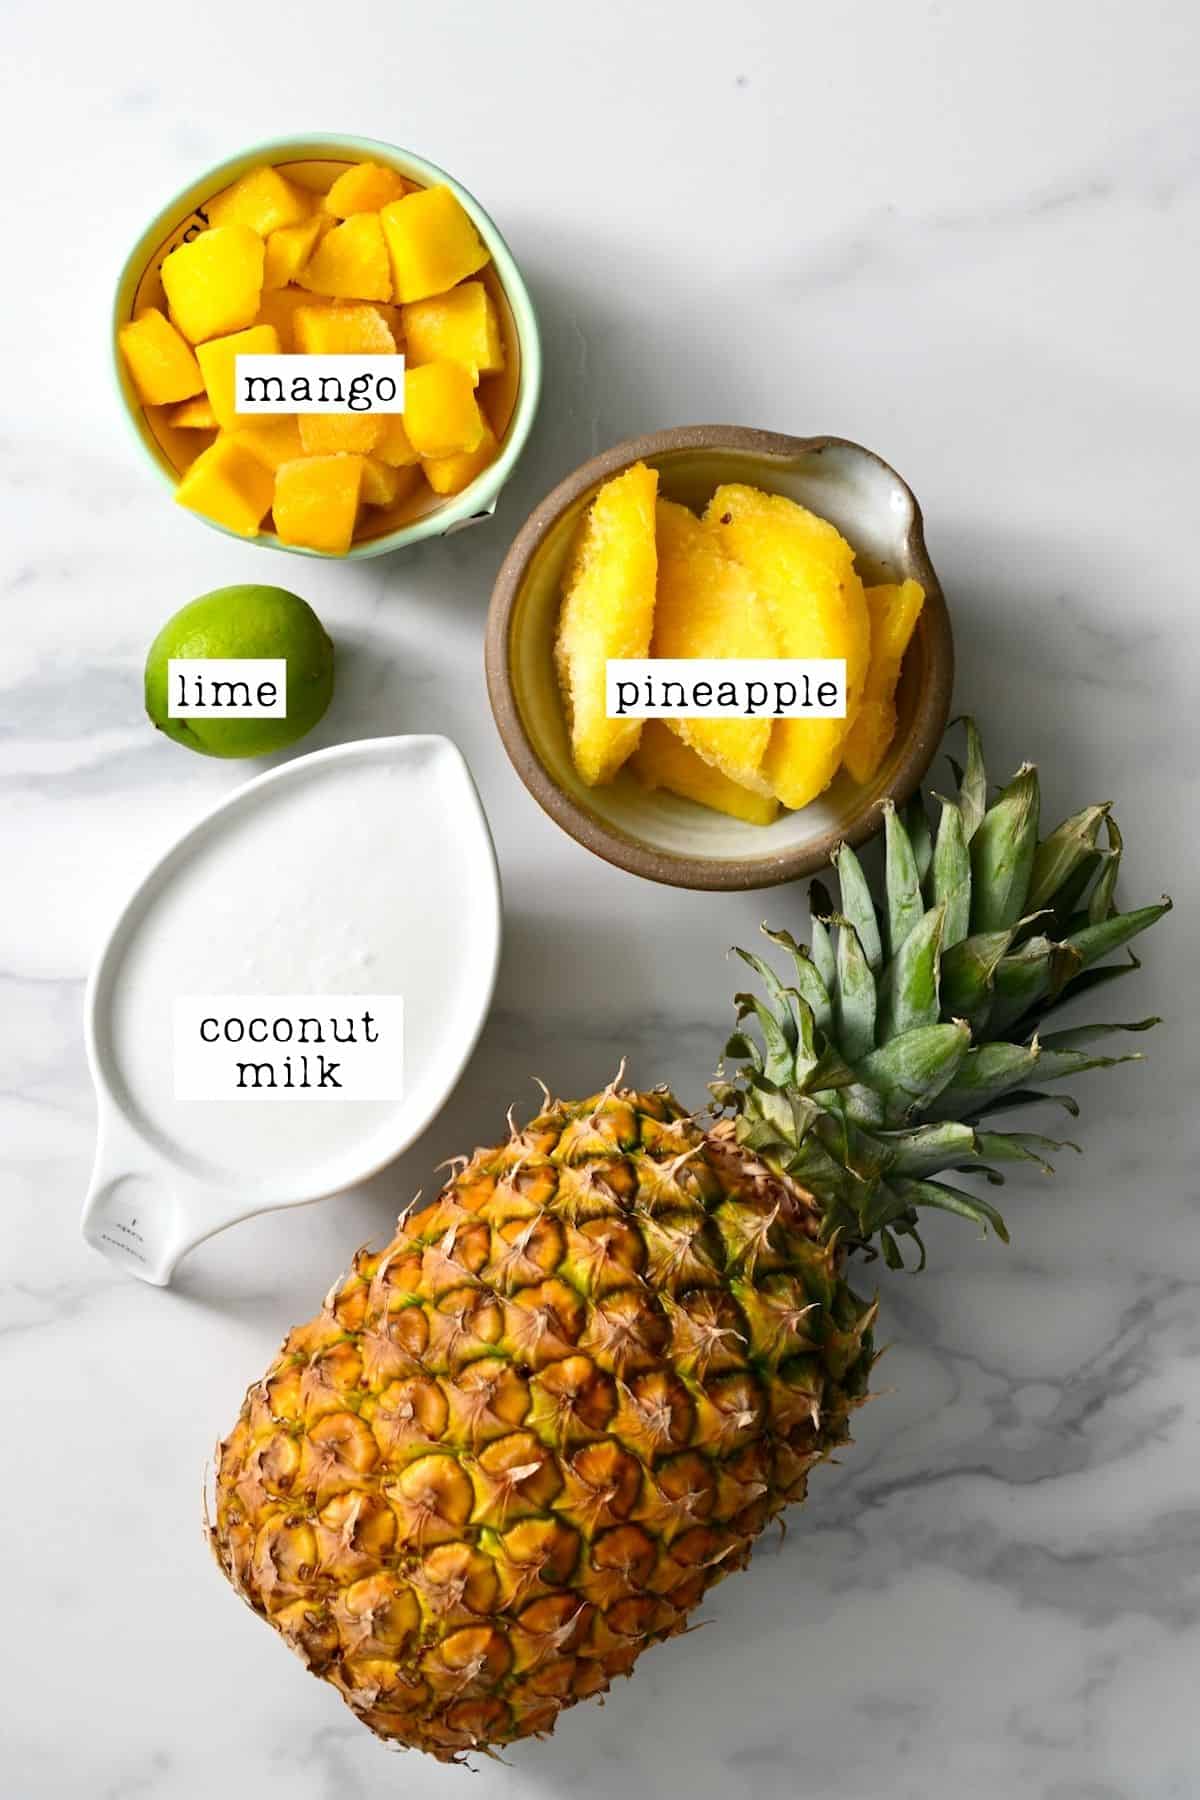 Ingredients for mango pineapple smoothie